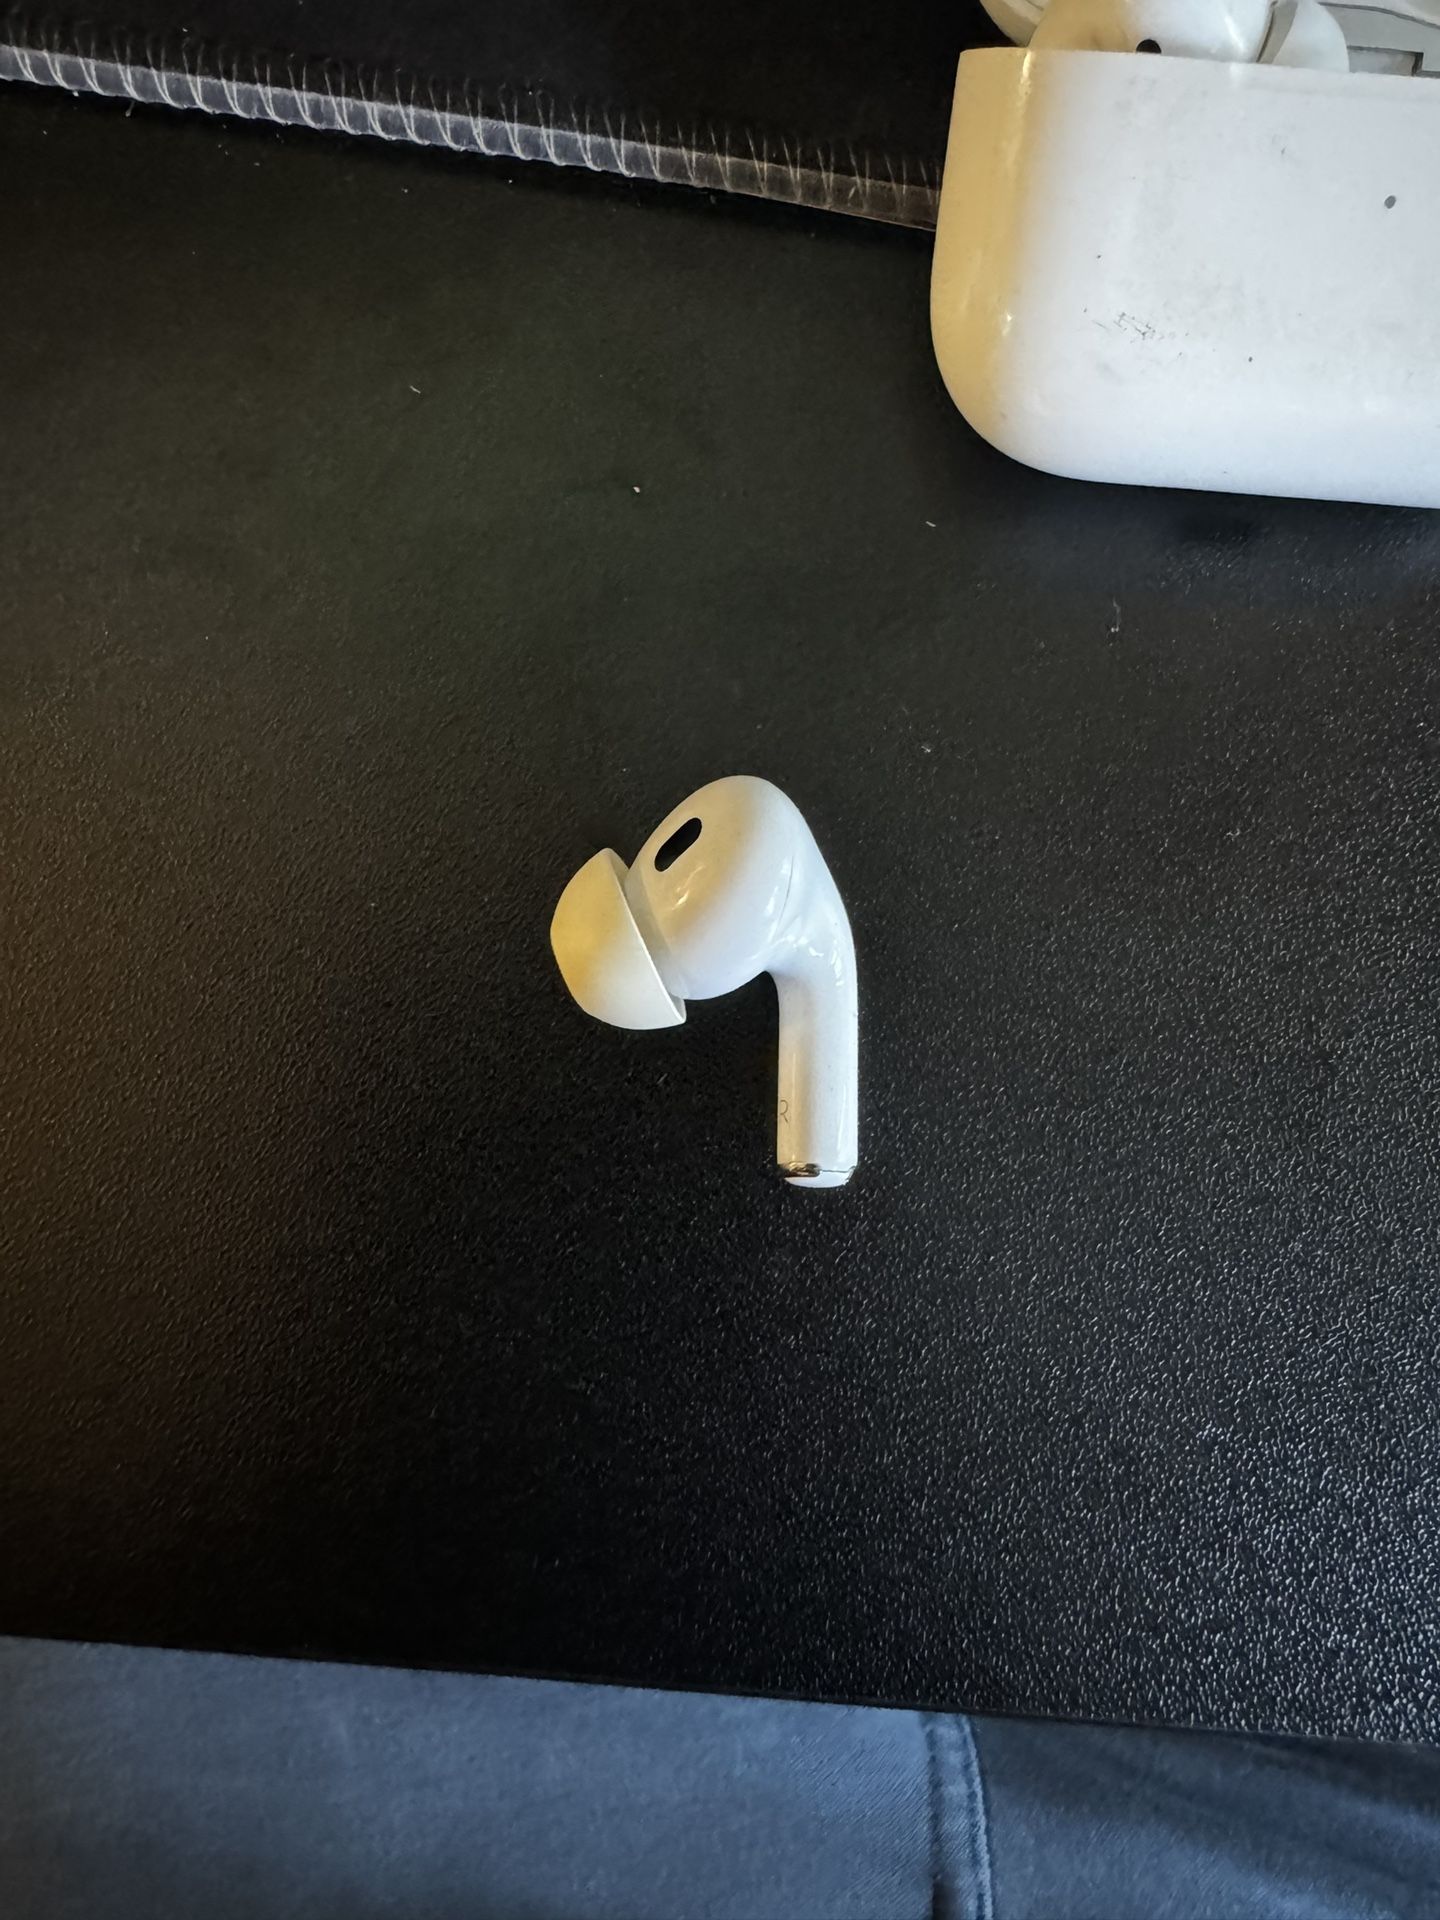 Right AirPod Pro 2nd Gen